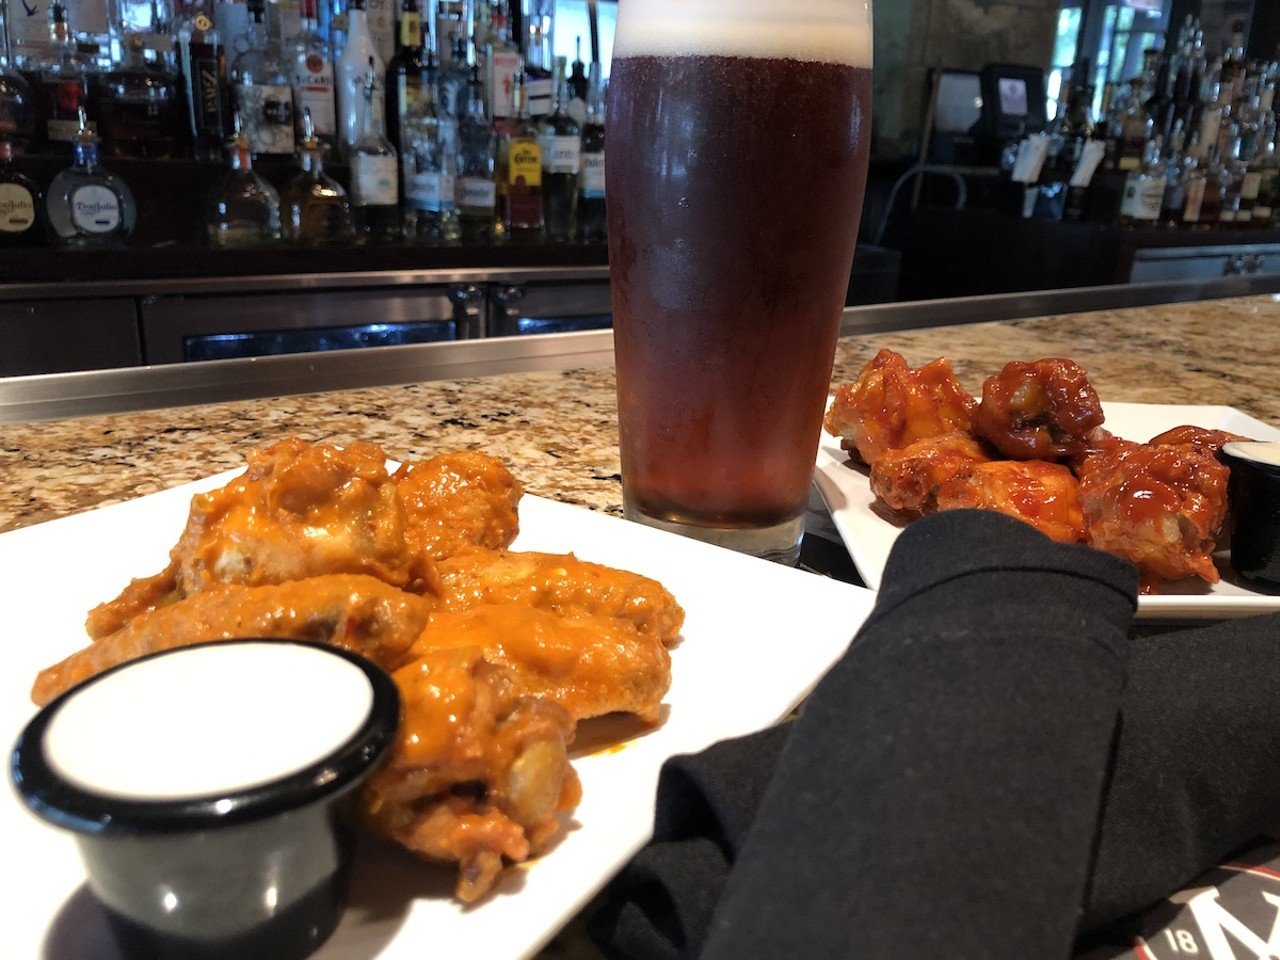 Moerlein Lager House
115 Joe Nuxhall Way, The Banks
Seven for $7 Honey Chipotle BBQ Wings: Wings come with a sweet and tangy sauce that has a touch of heat from the chipotle.
Seven for $7 Traditional Buffalo Wings: Wings come with a classic buffalo sauce with mild heat. 
Moerlein will also offer the Chef's Inspiration Wings as a daily special.